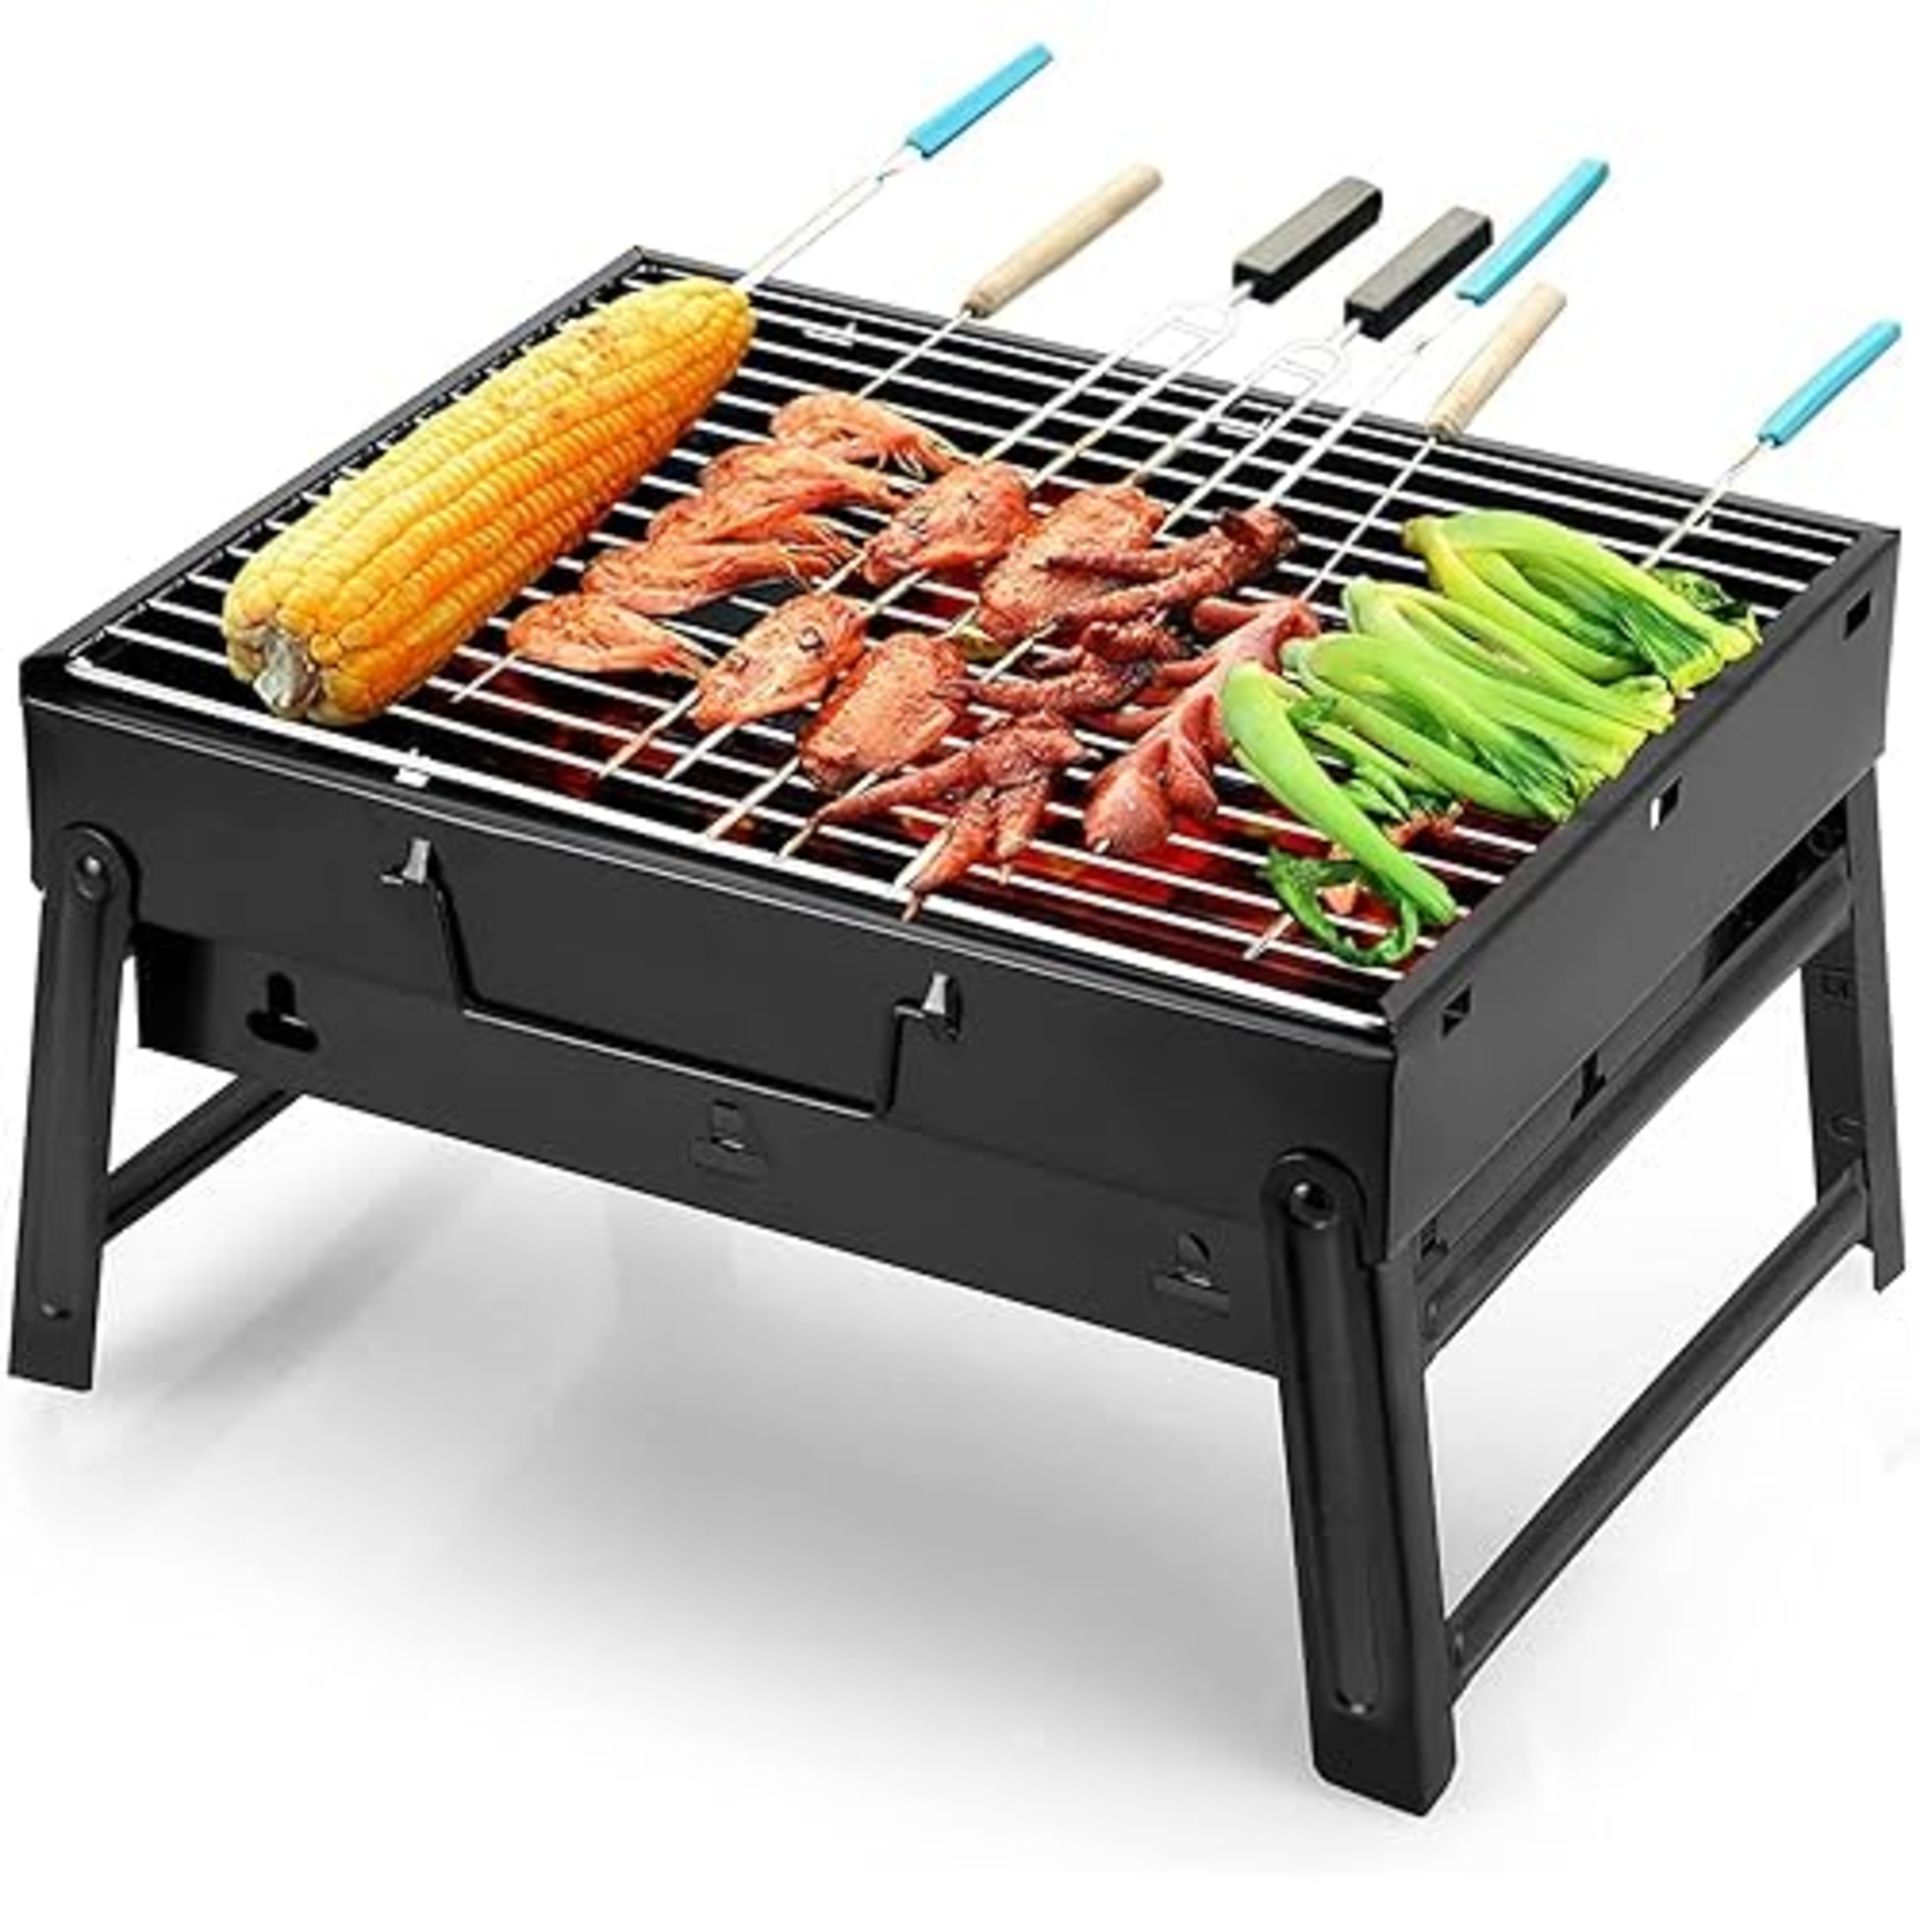 Charcoal Barbecues, Uten Barbecue Grill, BBQ Grill, Portable Folding Charcoal Barbecue Grill Stainl